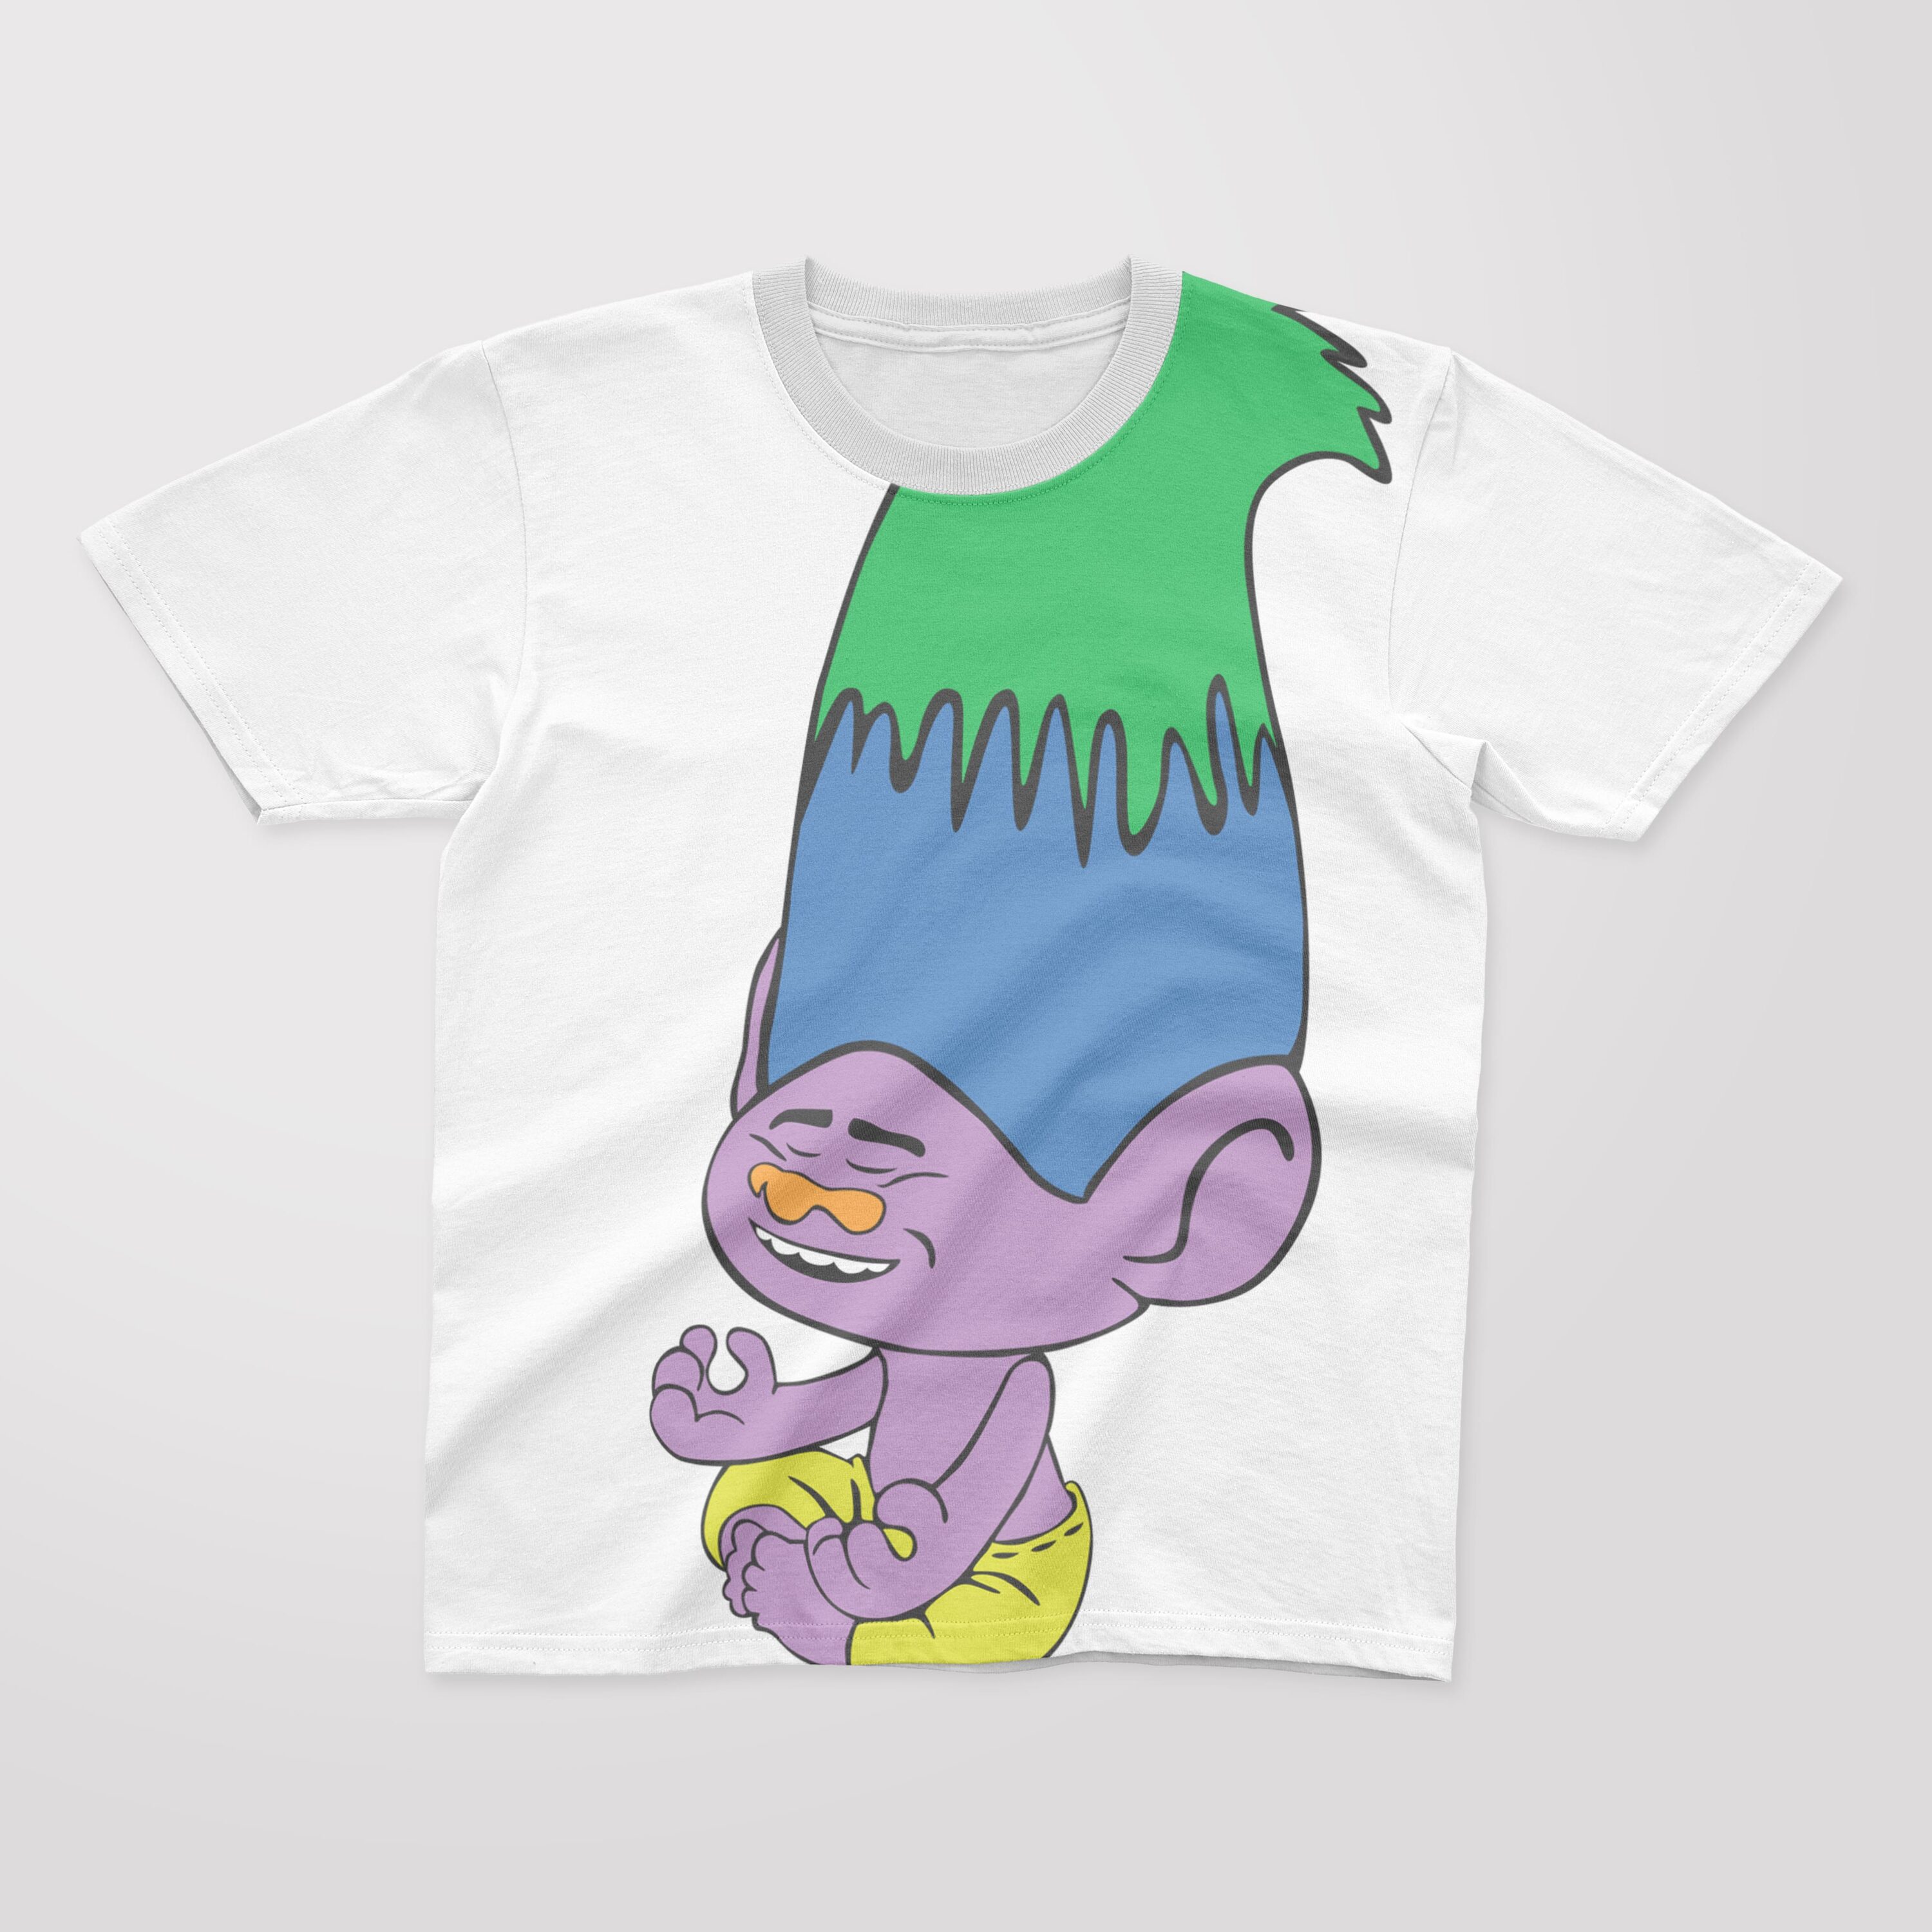 White T-shirt with image of cartoon character - Creek.